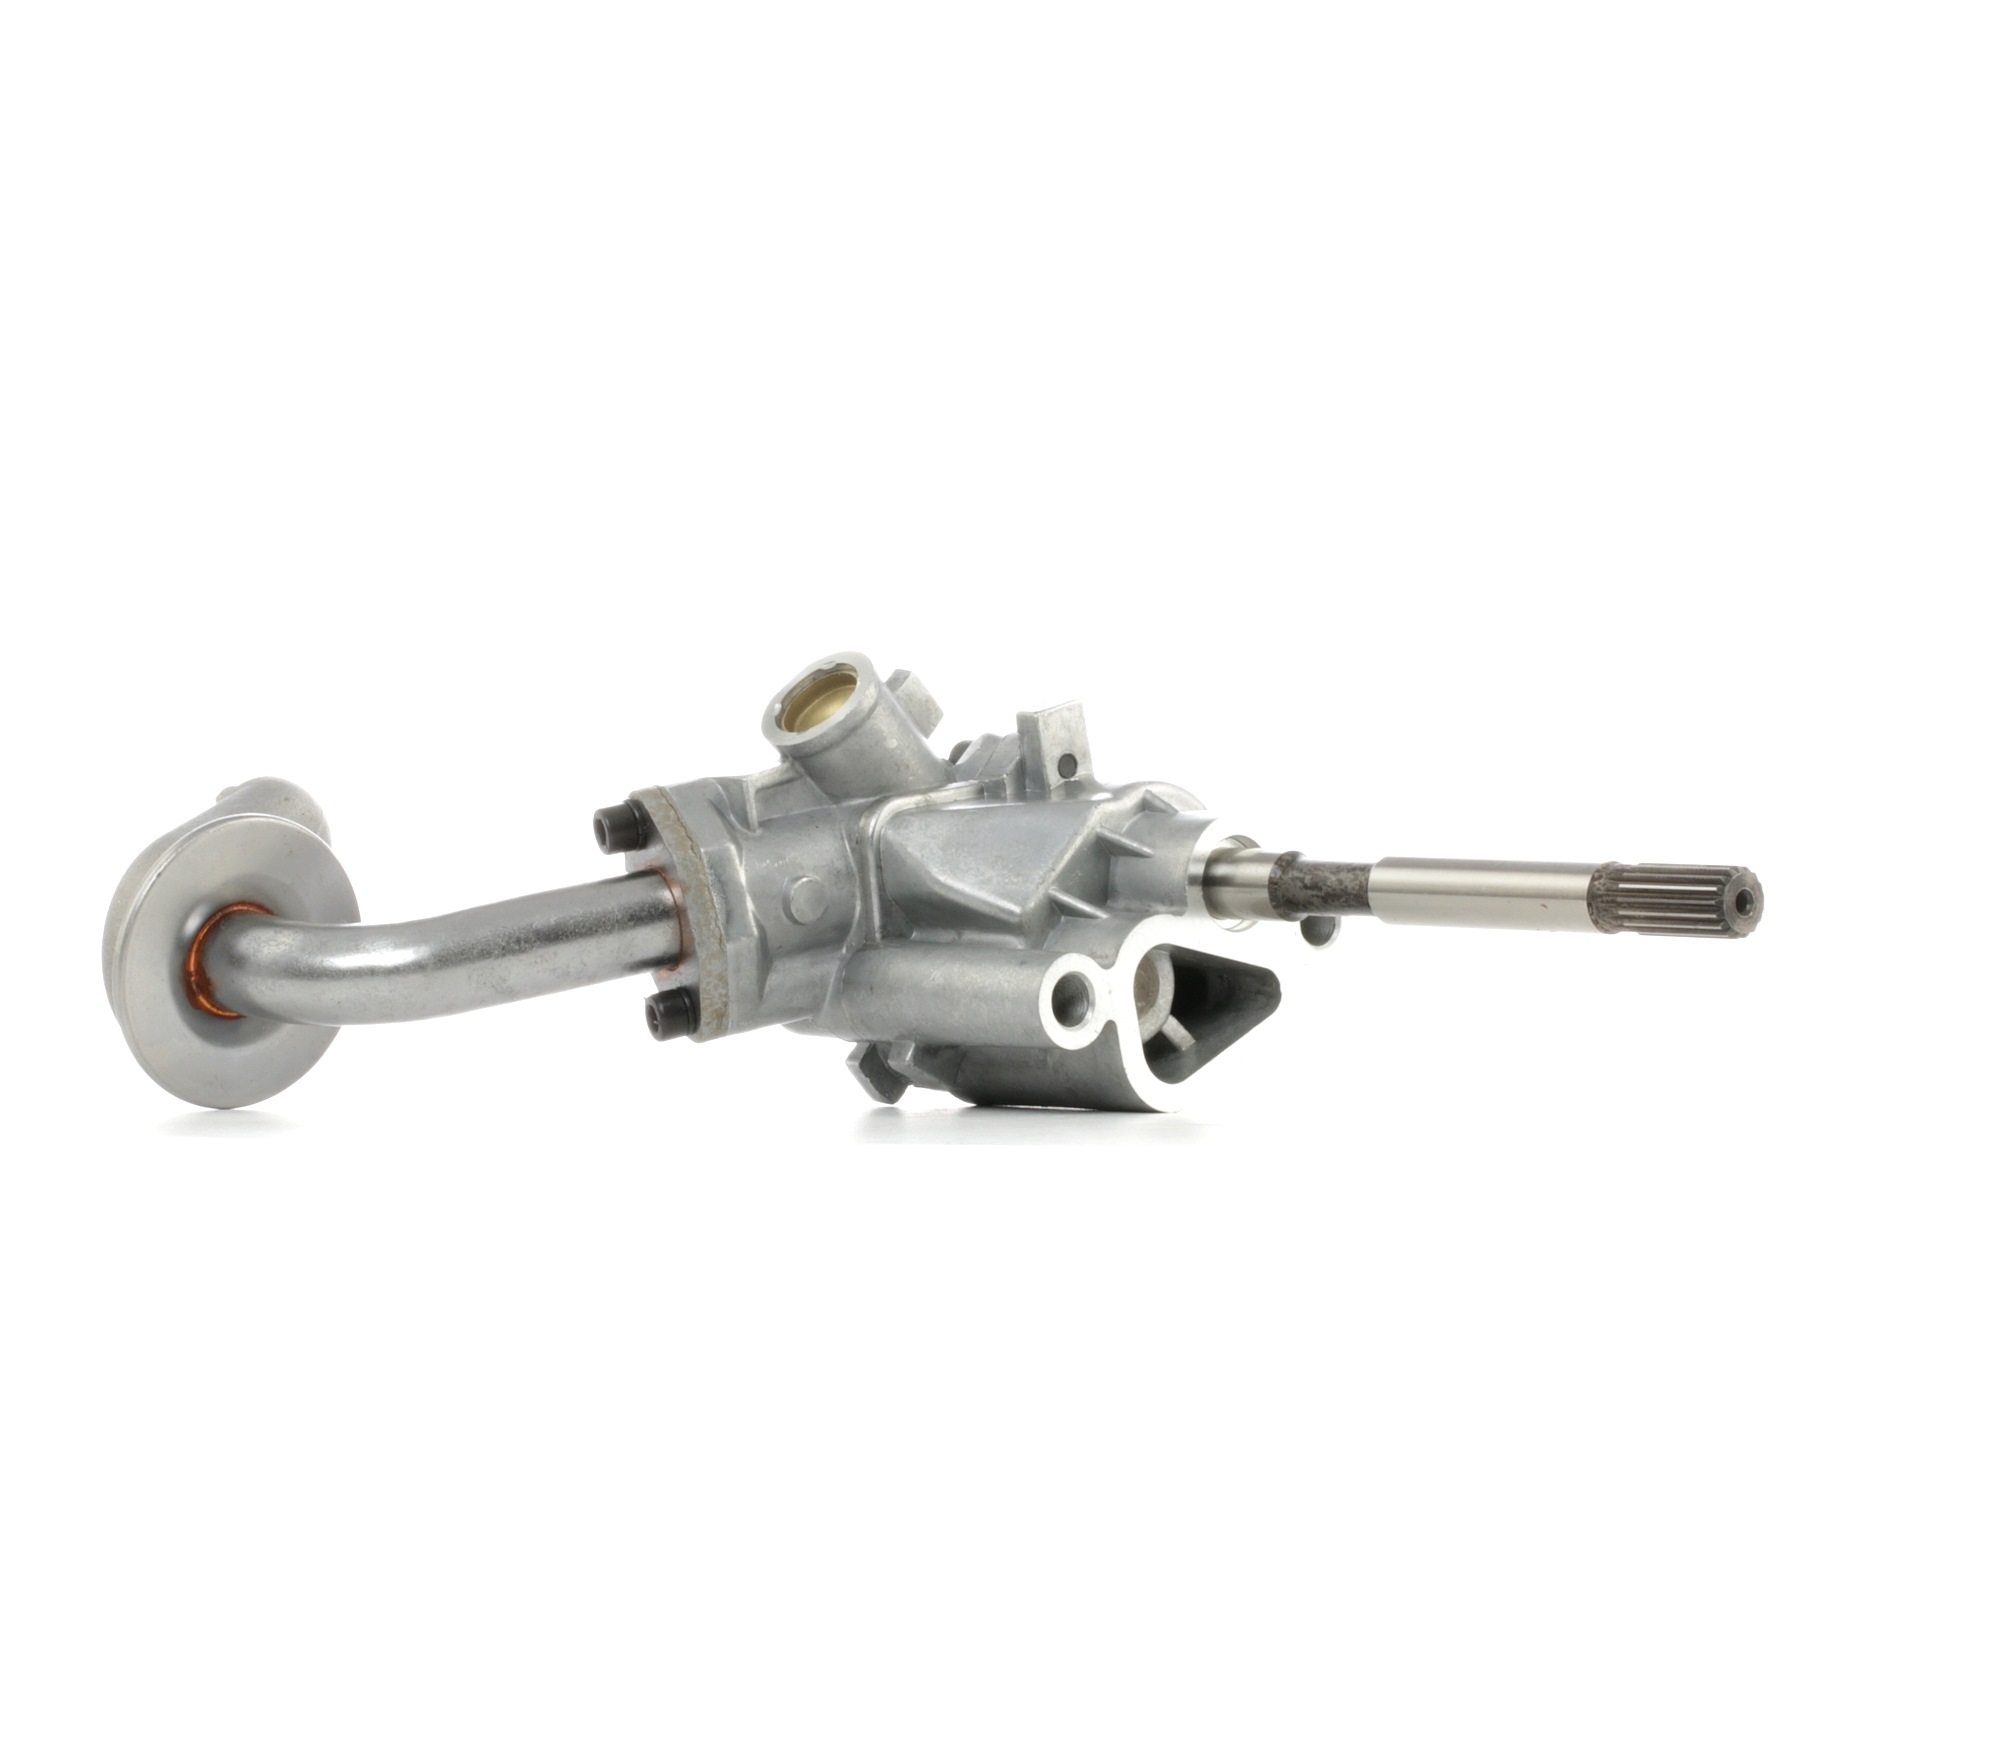 STARK SKOPM-1700085 Oil Pump with suction pipe